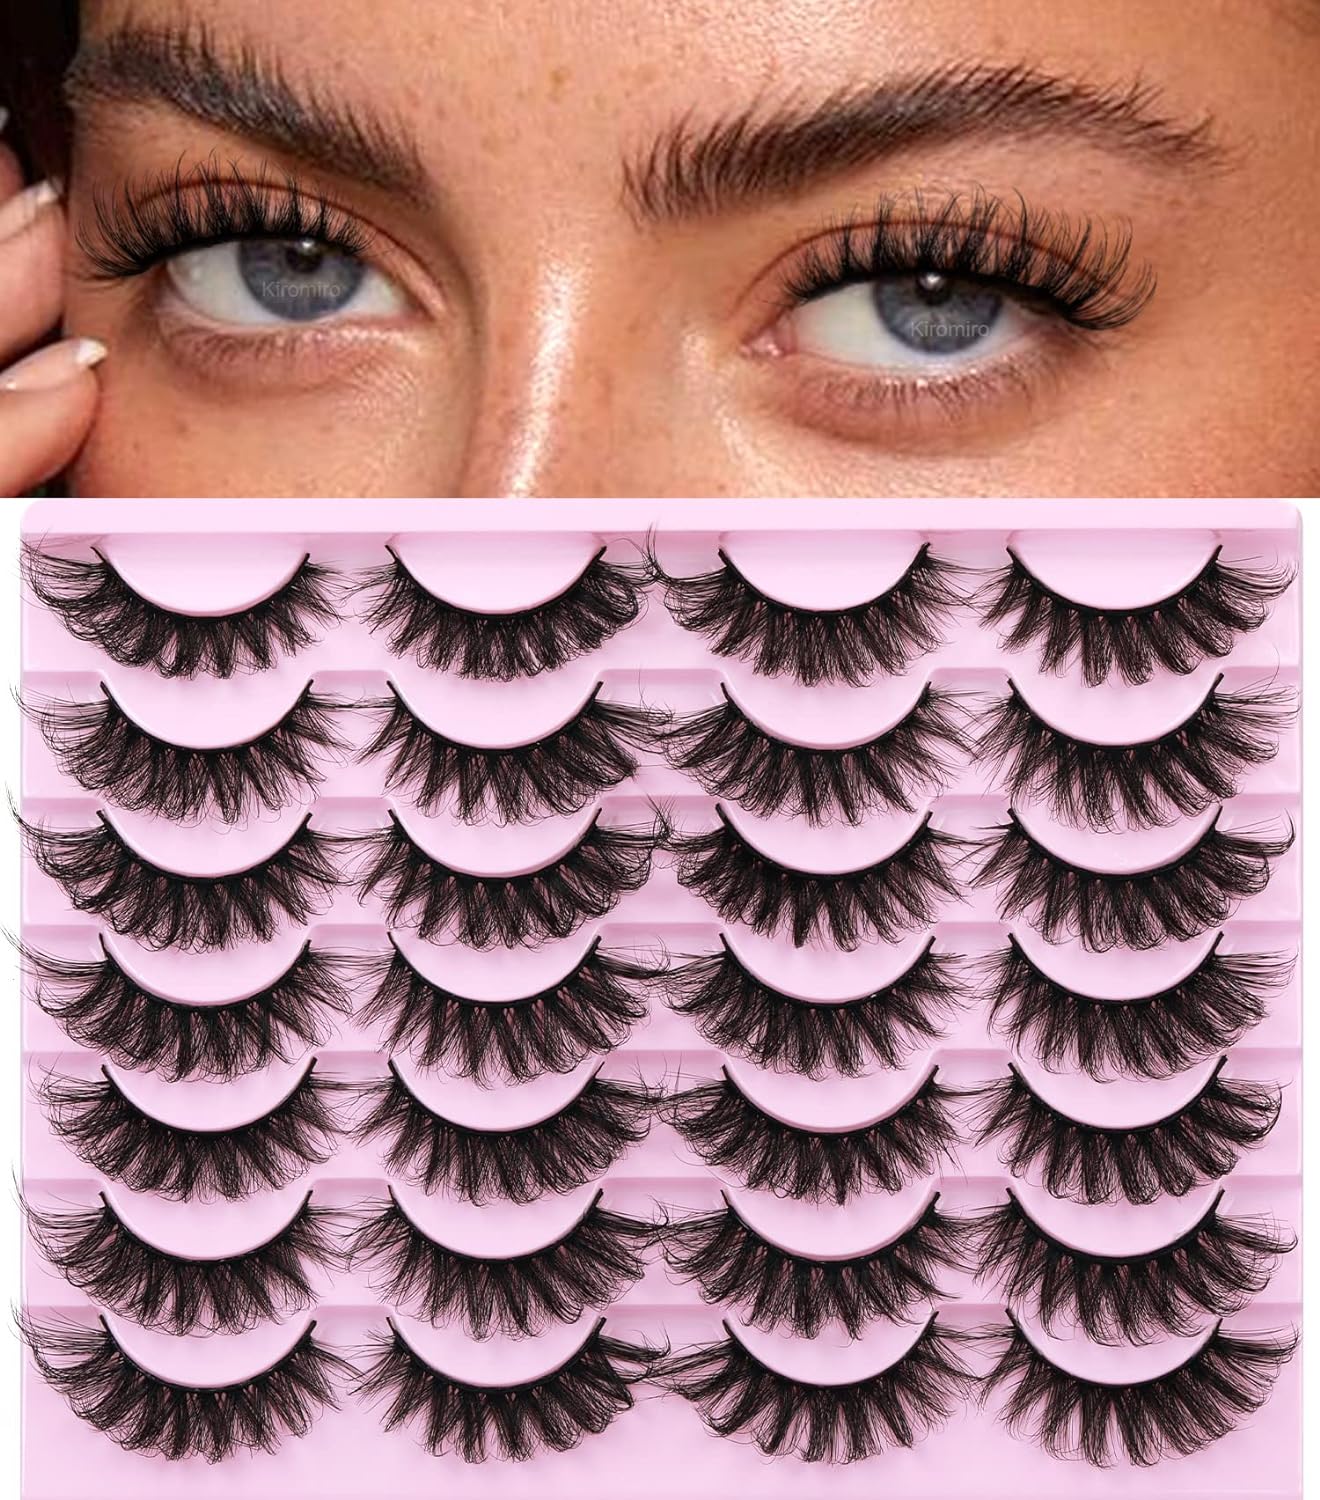 Mink Lashes Fluffy Russian Mink Lashes Extension 17mm Wispy False Eyelashes 6D D Curl Russian Strip Lashes Pack by Kiromiro